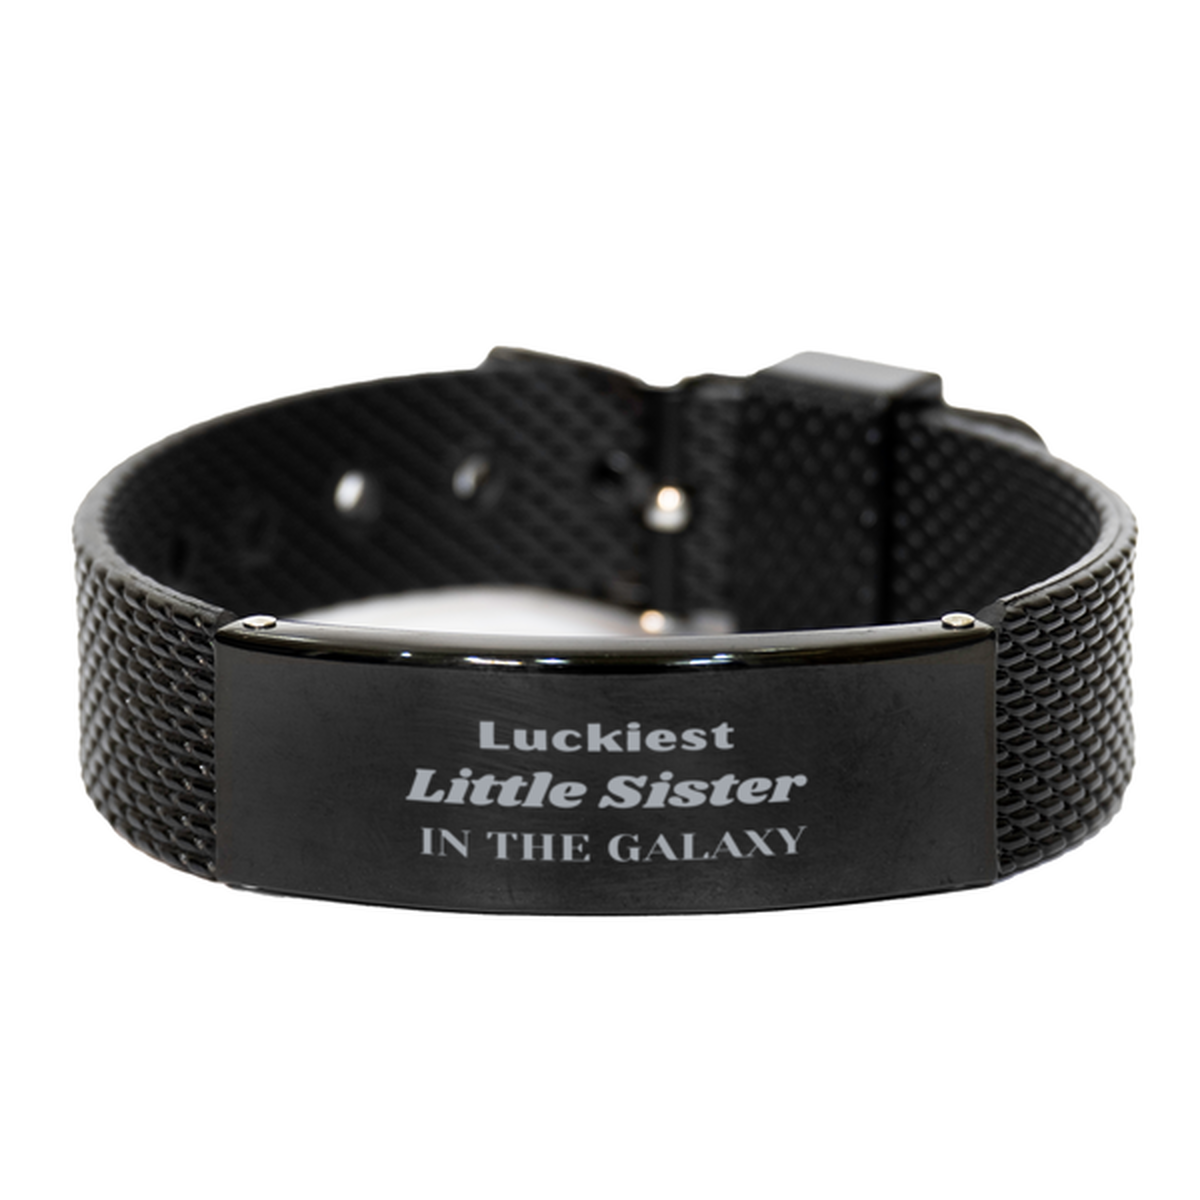 Luckiest Little Sister in the Galaxy, To My Little Sister Engraved Gifts, Christmas Little Sister Black Shark Mesh Bracelet Gifts, X-mas Birthday Unique Gifts For Little Sister Men Women